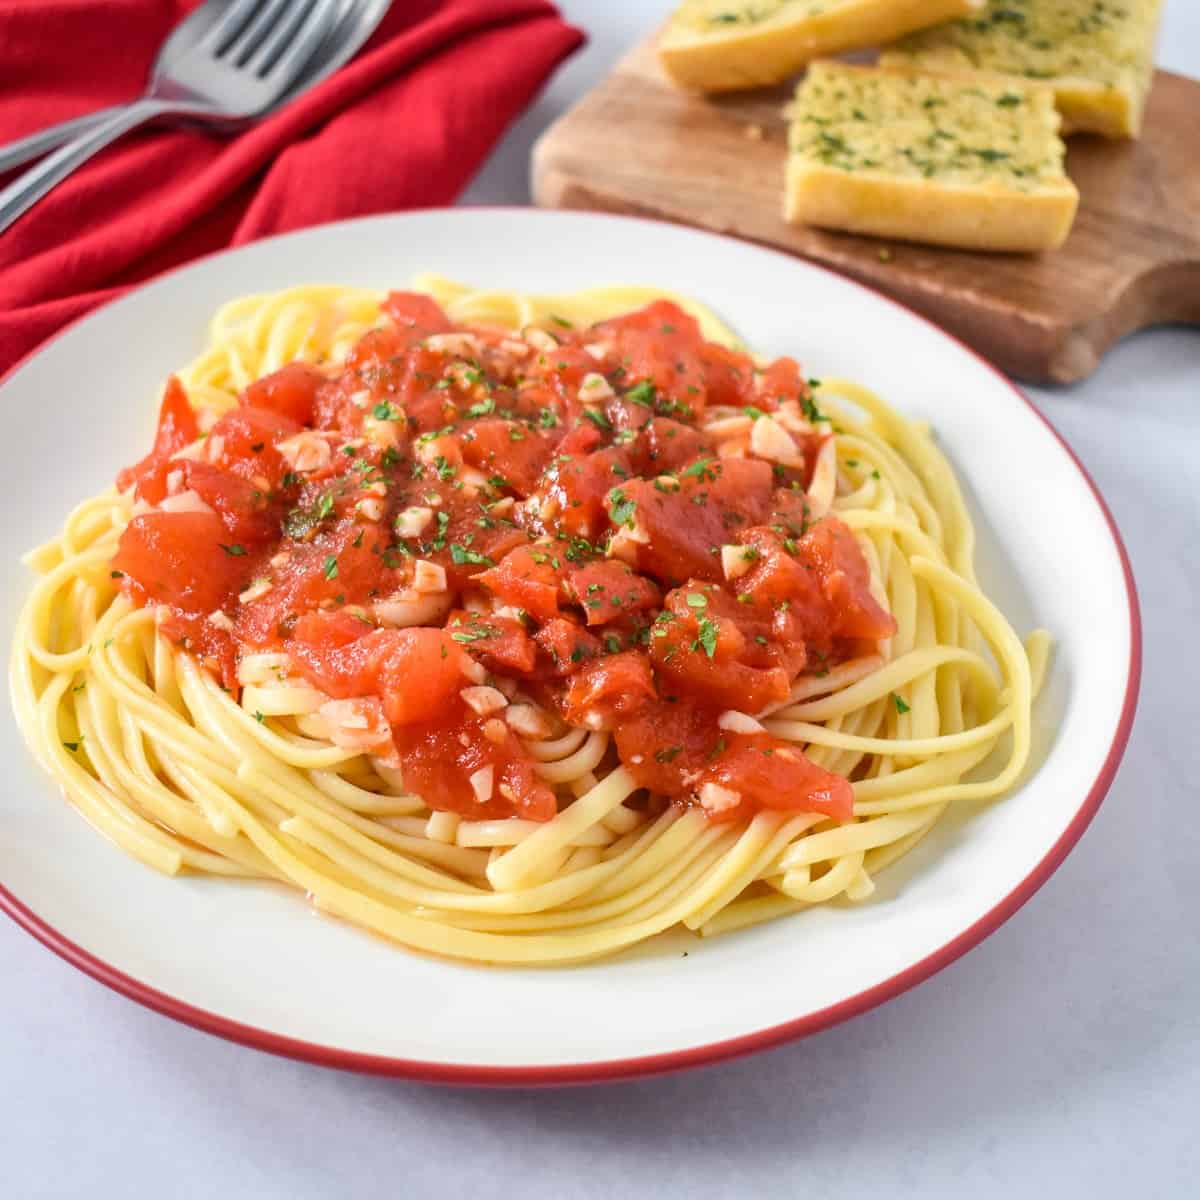 The finished pasta with tomatoes served on a white plate with a red rim, a red linen and silverware to the left side and garlic bread to the top right.